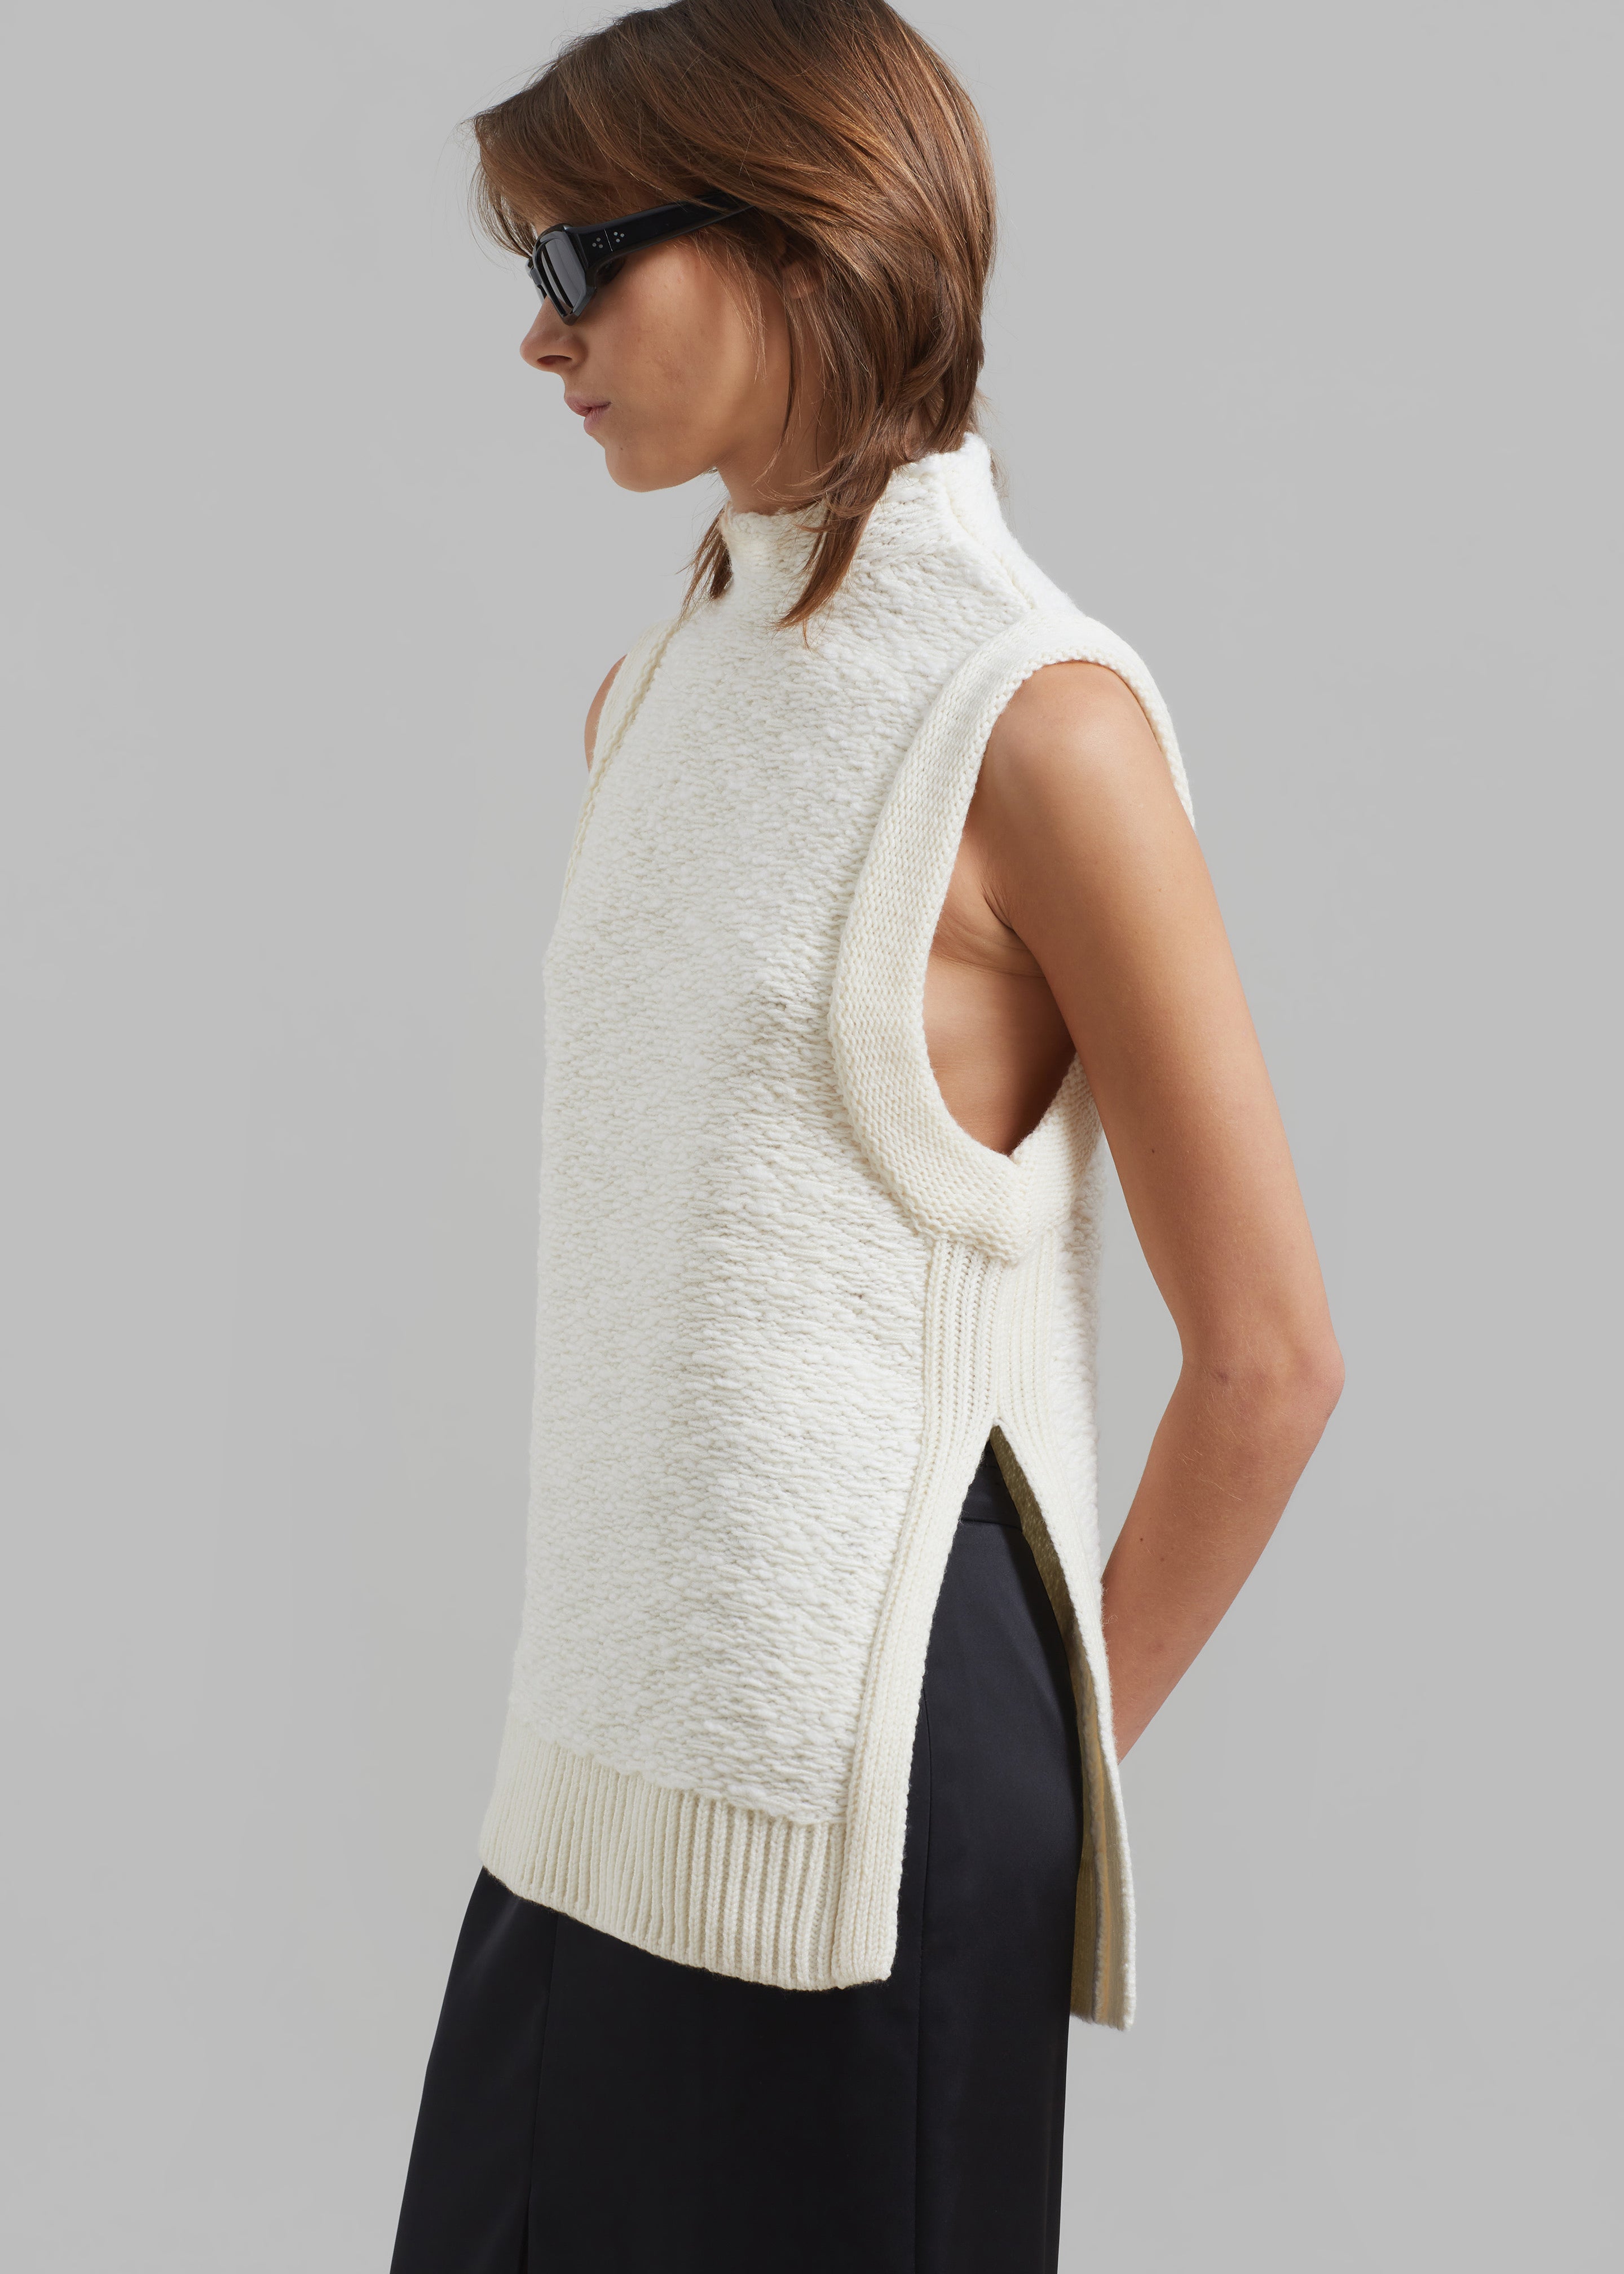 Liverpool Los Angeles Knit Camisole Top - Jonah & Sage